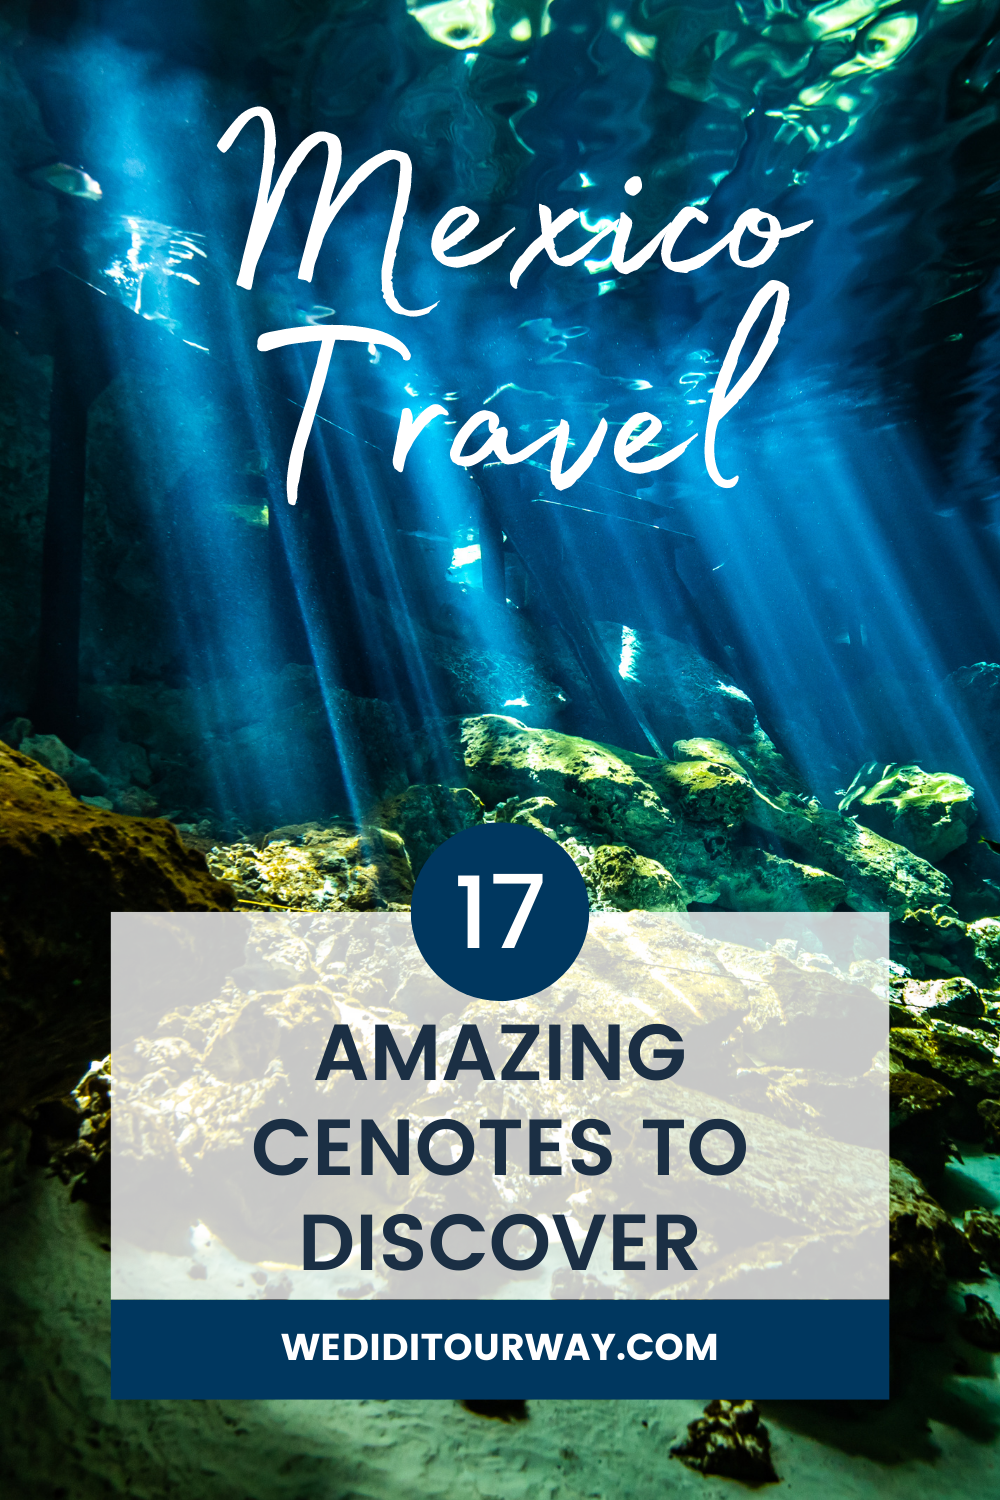 The best cenotes in Quintana Roo. The top sinkholes near Tulum, PDC, Bacalar and Cancun